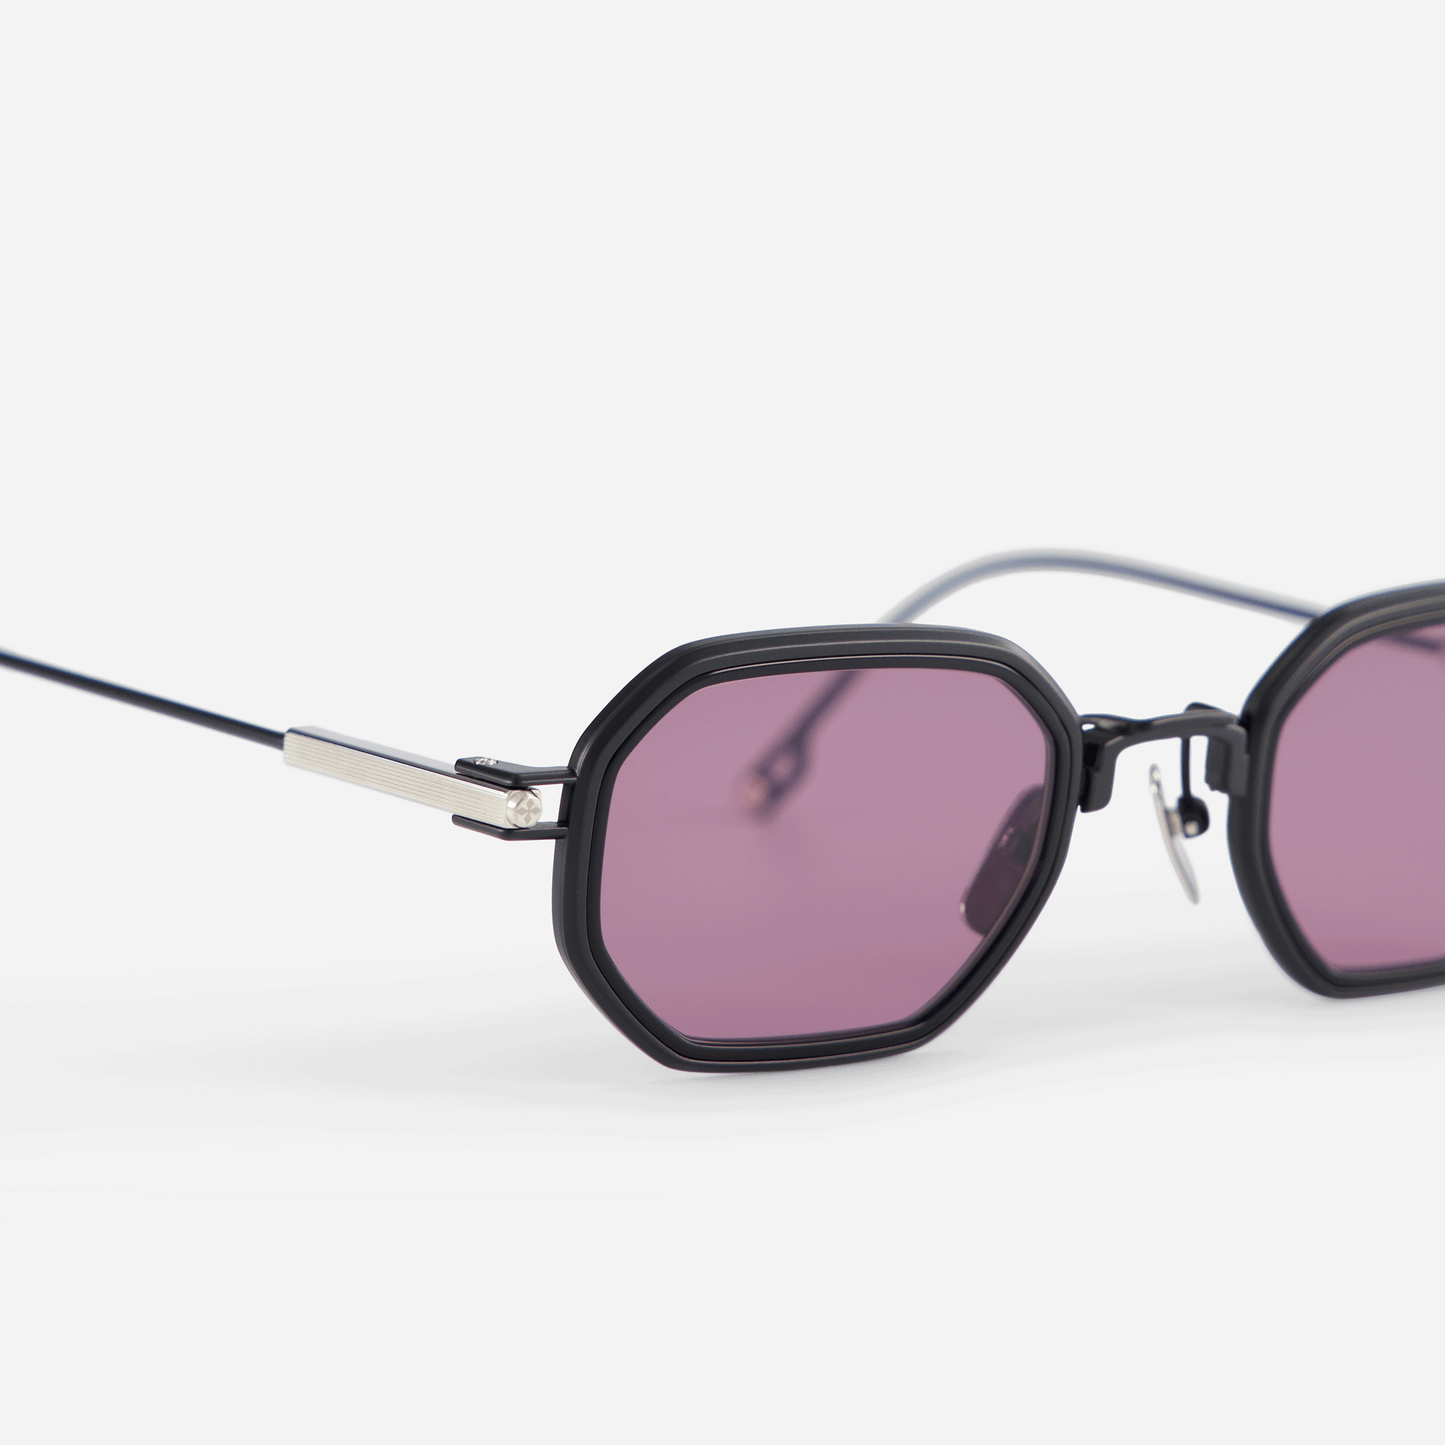 Timir-T S5505 glasses, showcasing the perfect combination of pure black and platinum titanium frames, a chic black Takiron insert, and violet lenses.